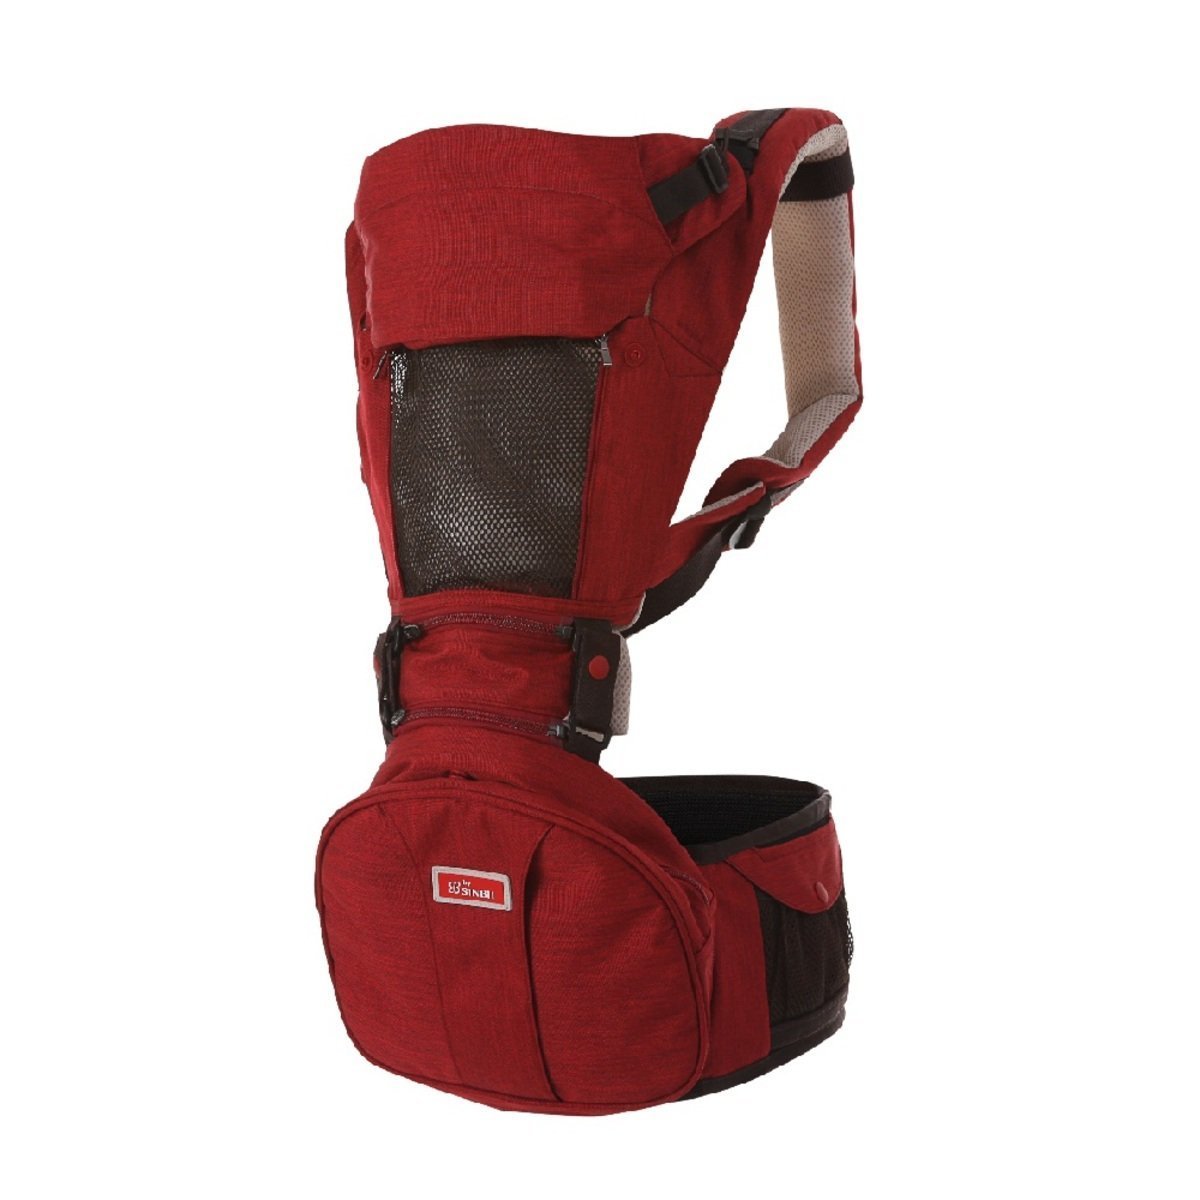 Sinbii EZBAG 2.0 HIPSEAT CARRIER-RED (Included drooping pads)